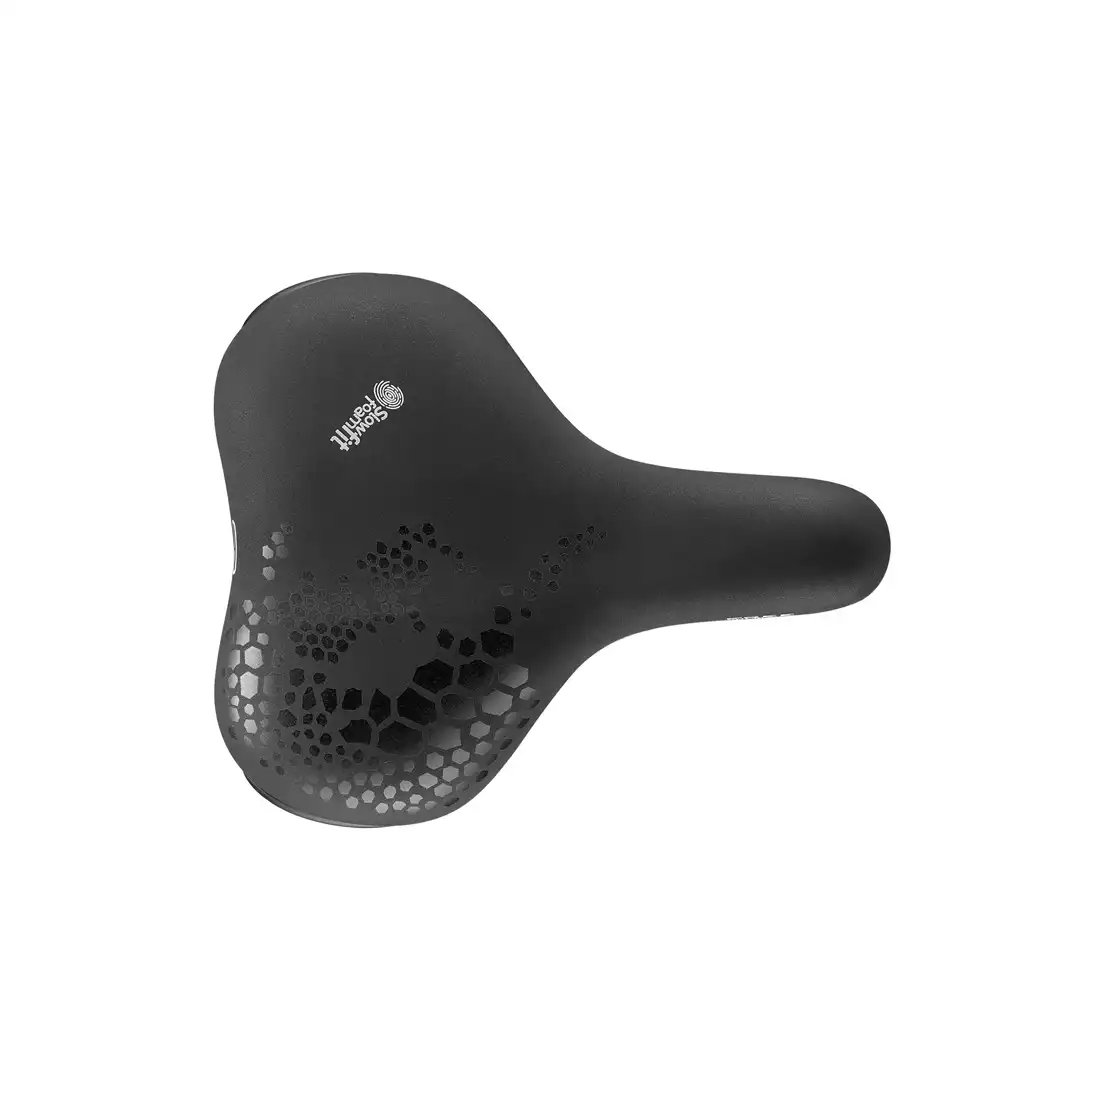 SELLEROYAL FREEWAY FIT CLASSIC RELAXED 90° bicycle seat, black